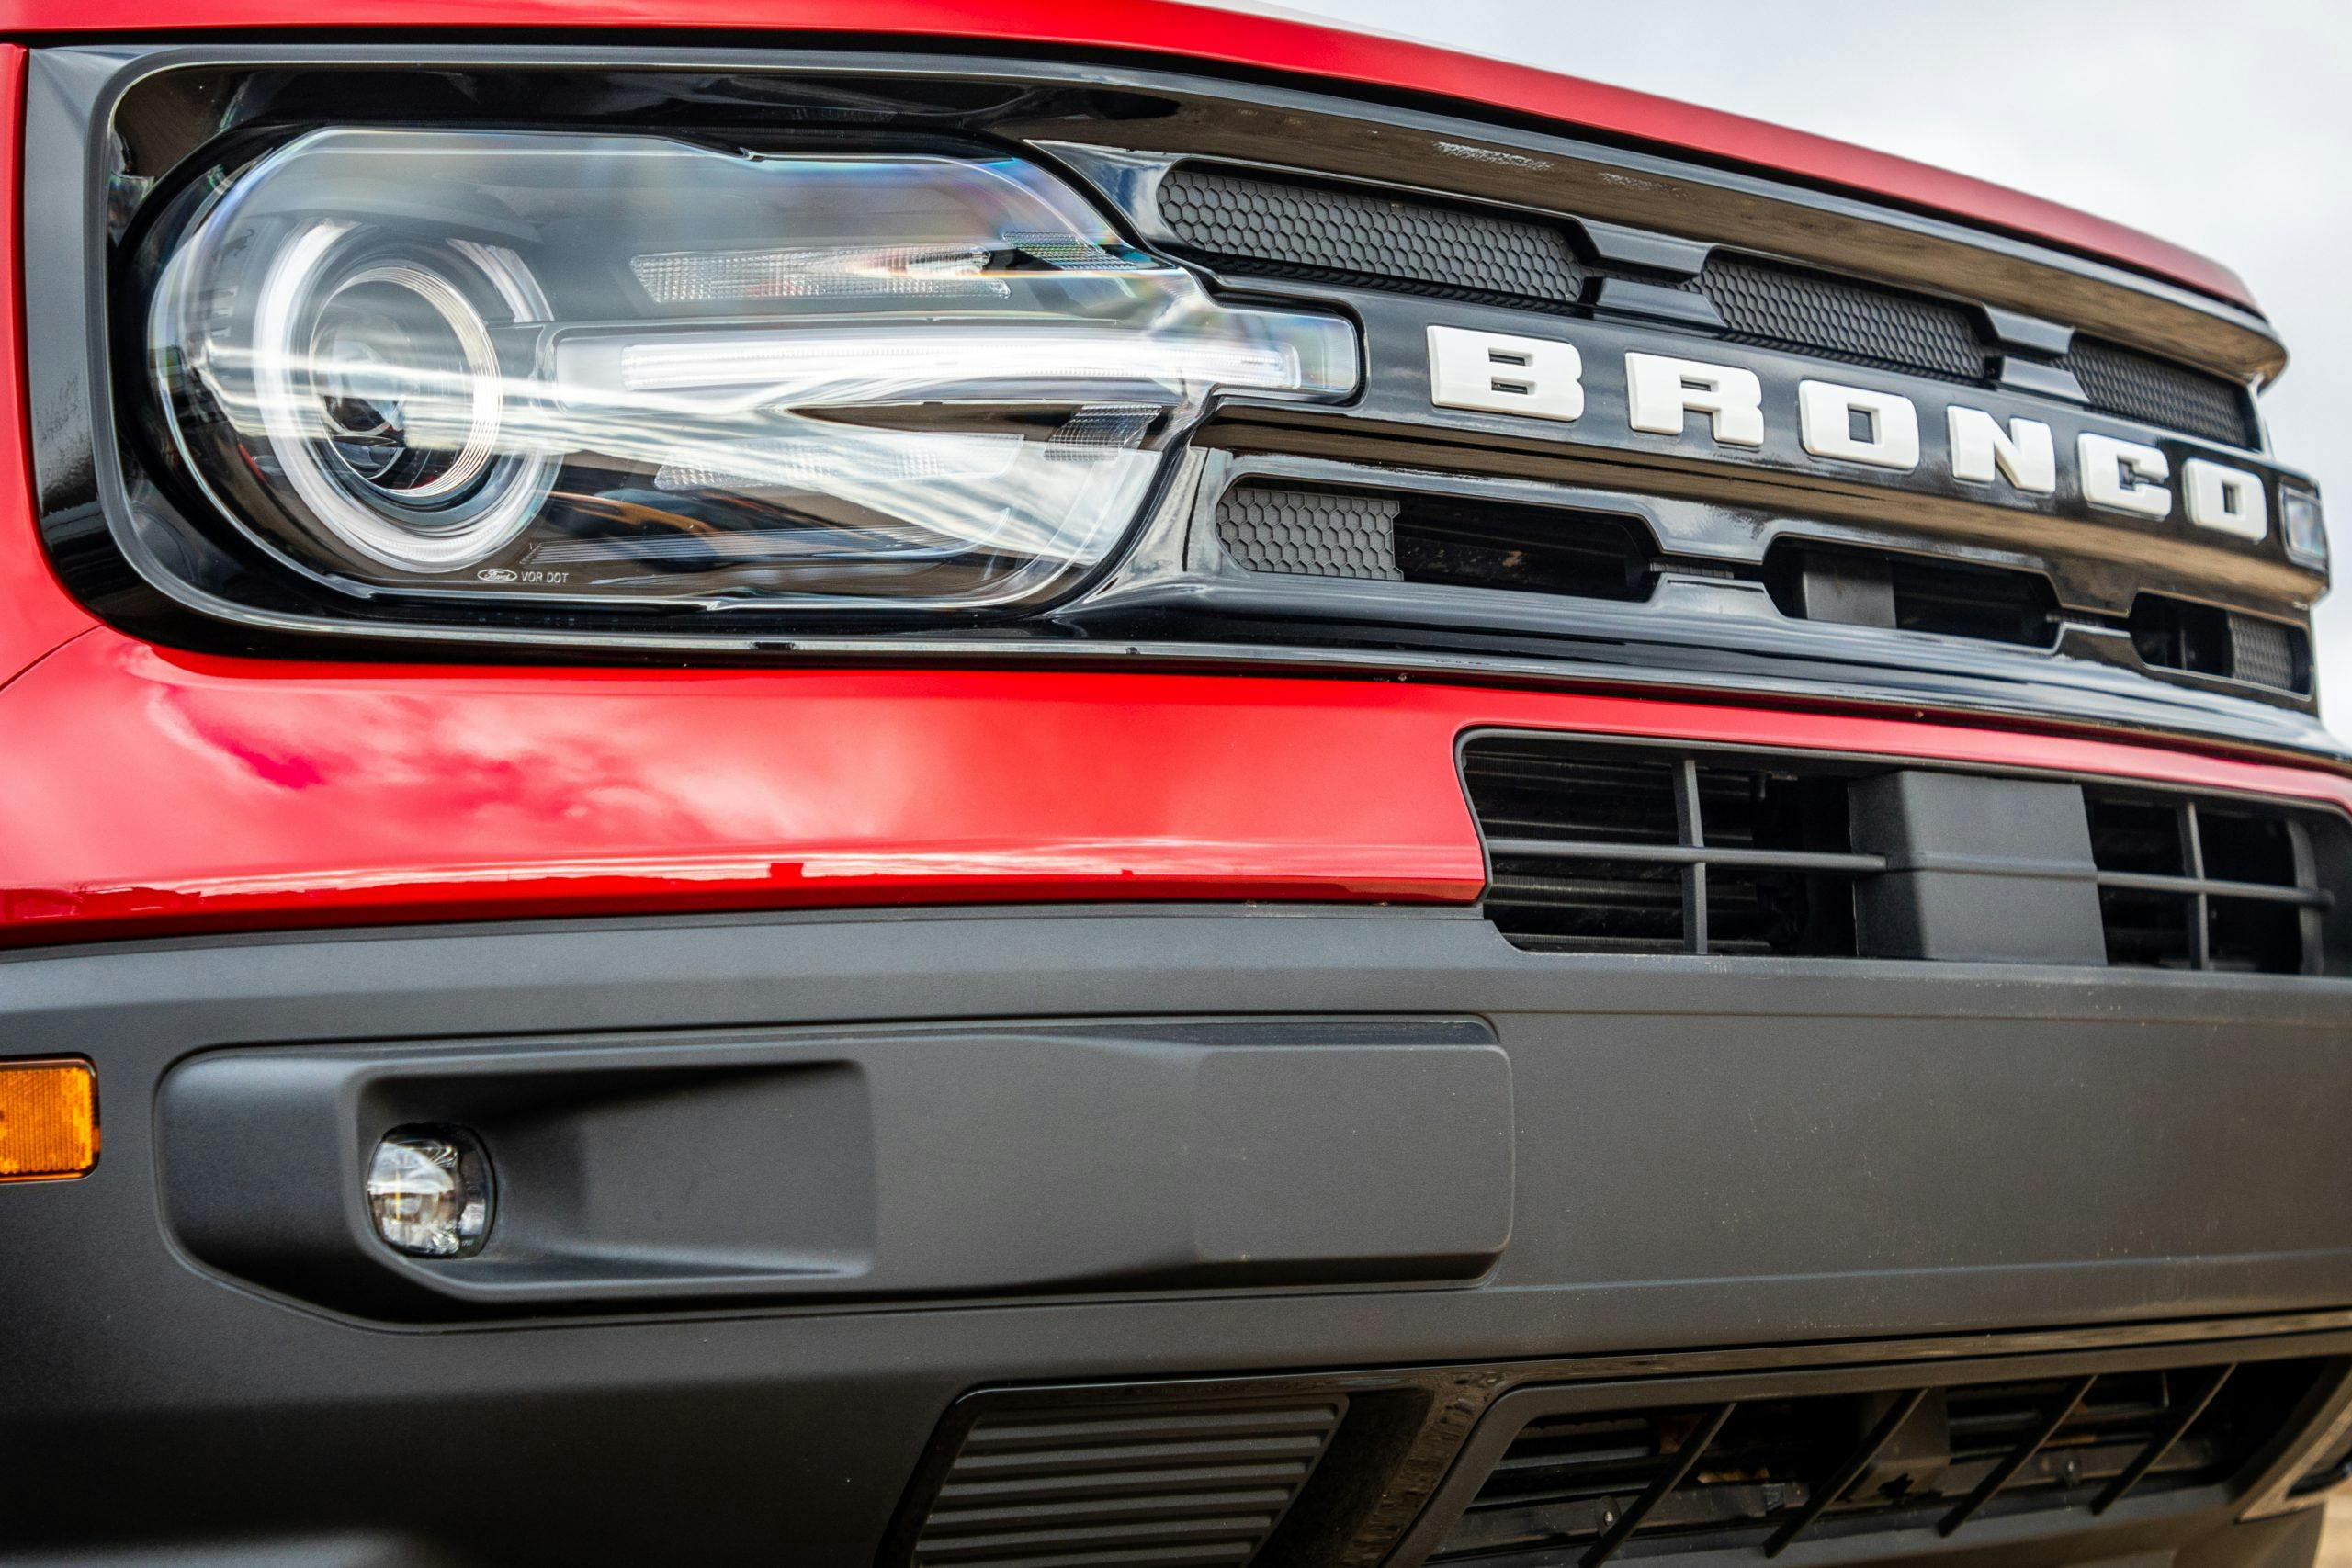 2021 Bronco Sport front headlight and grille